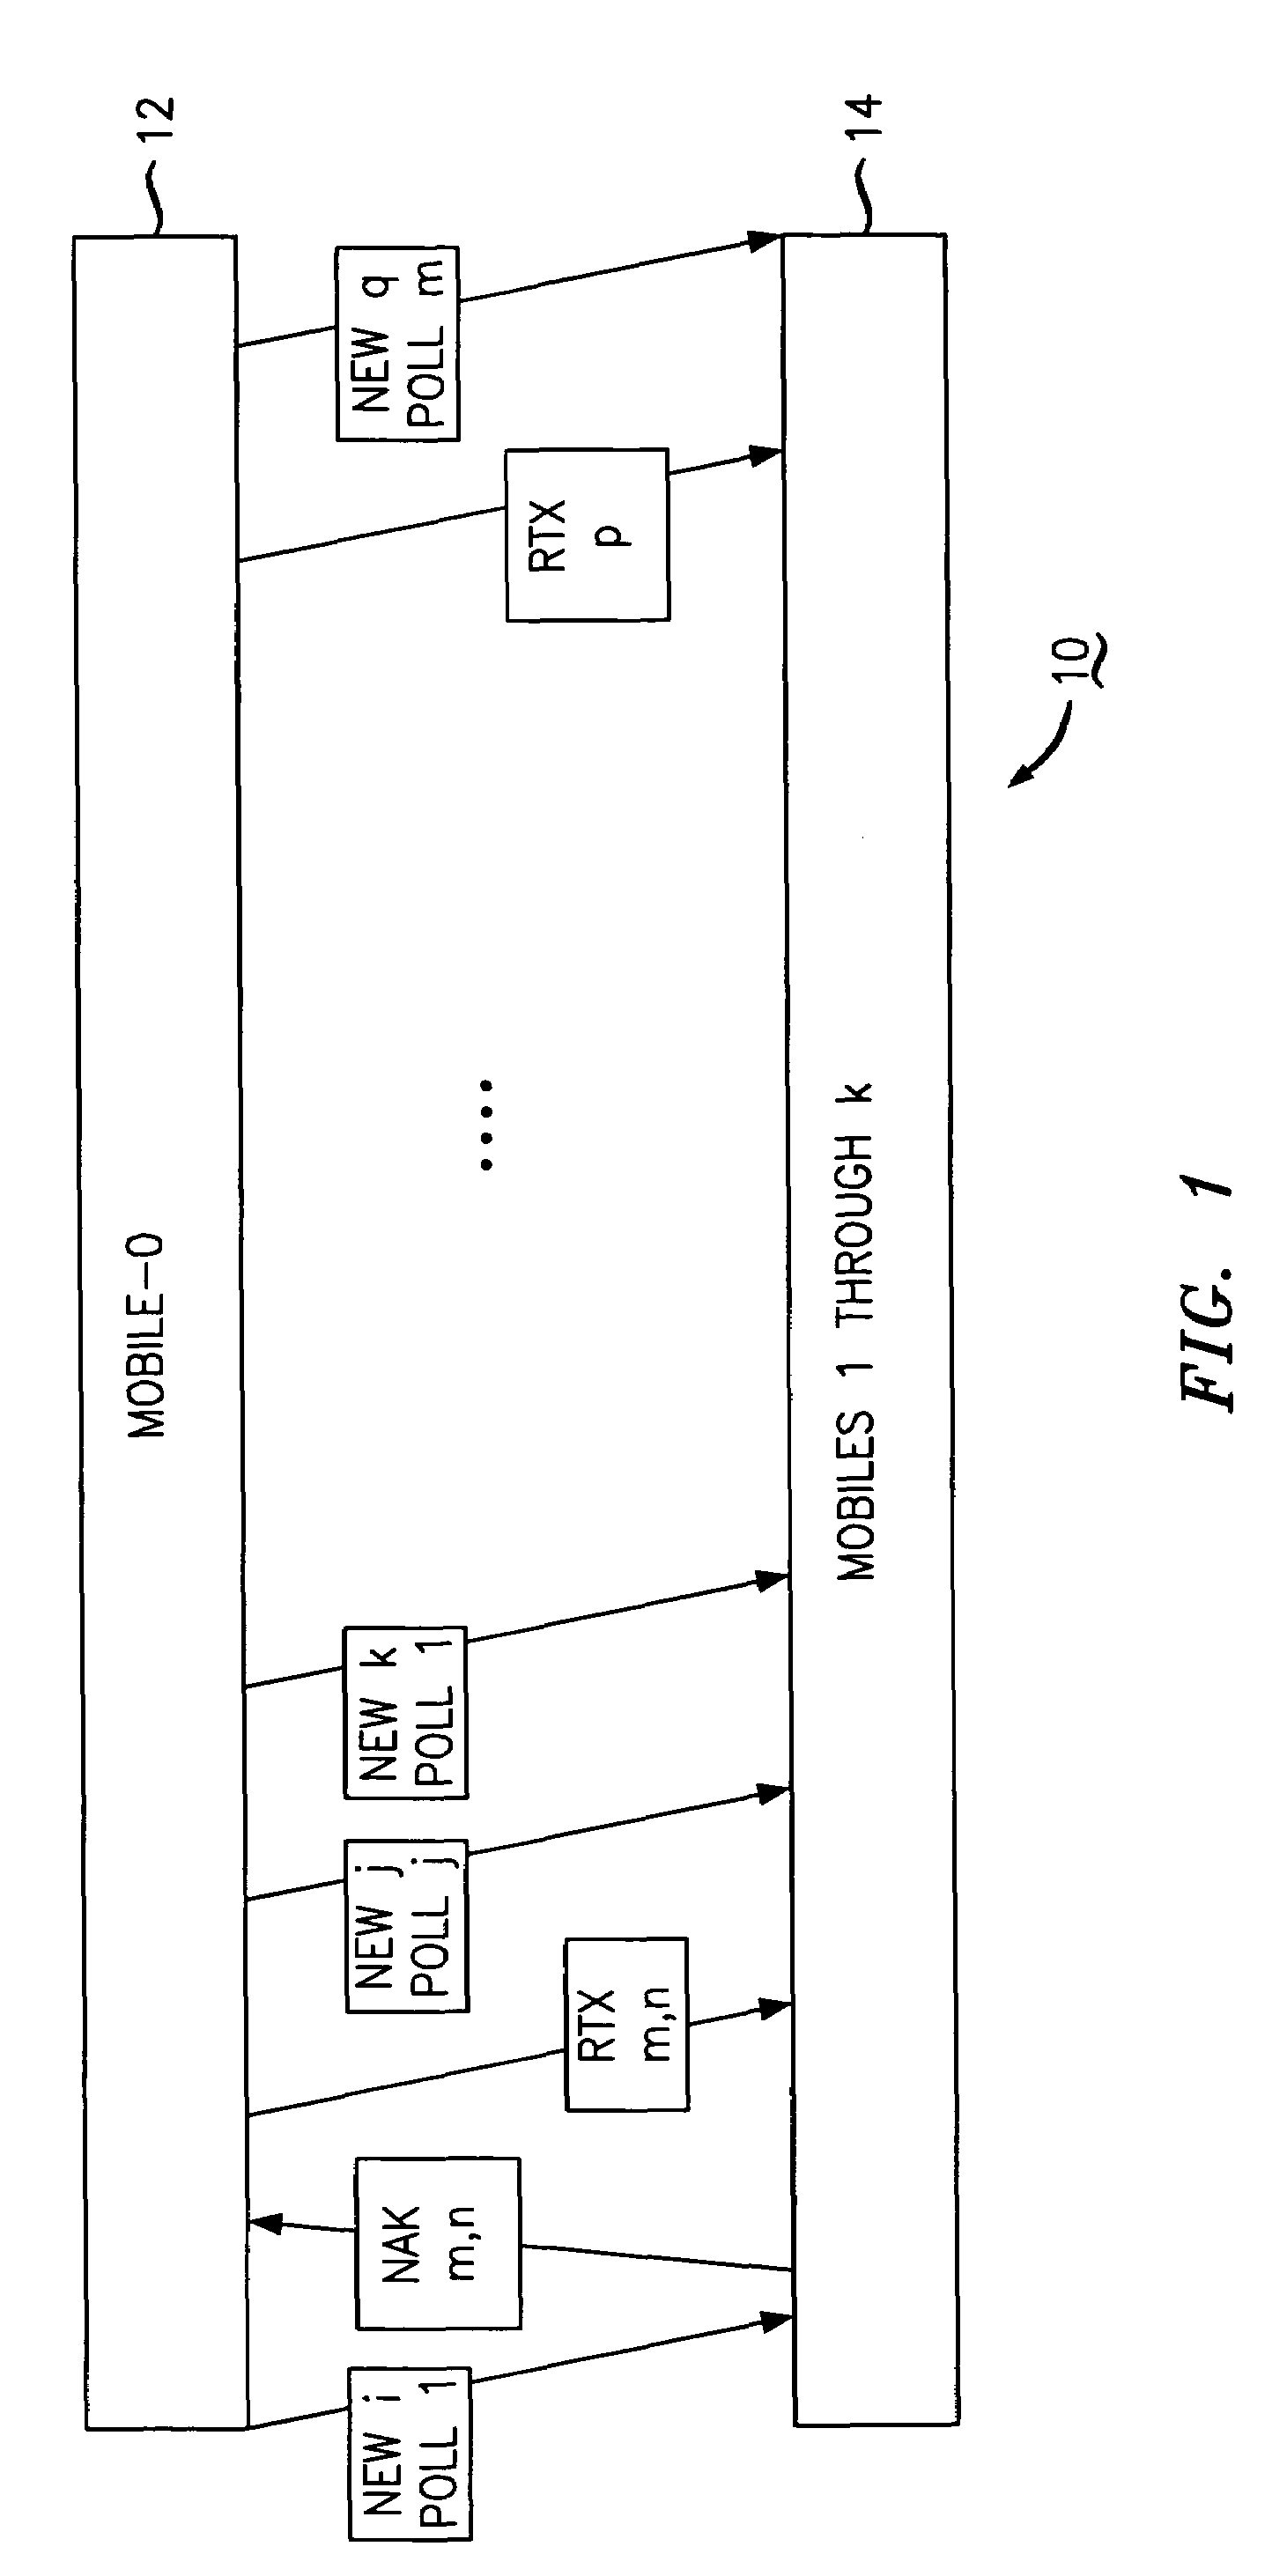 Methods and apparatus for reliable point to multipoint communications